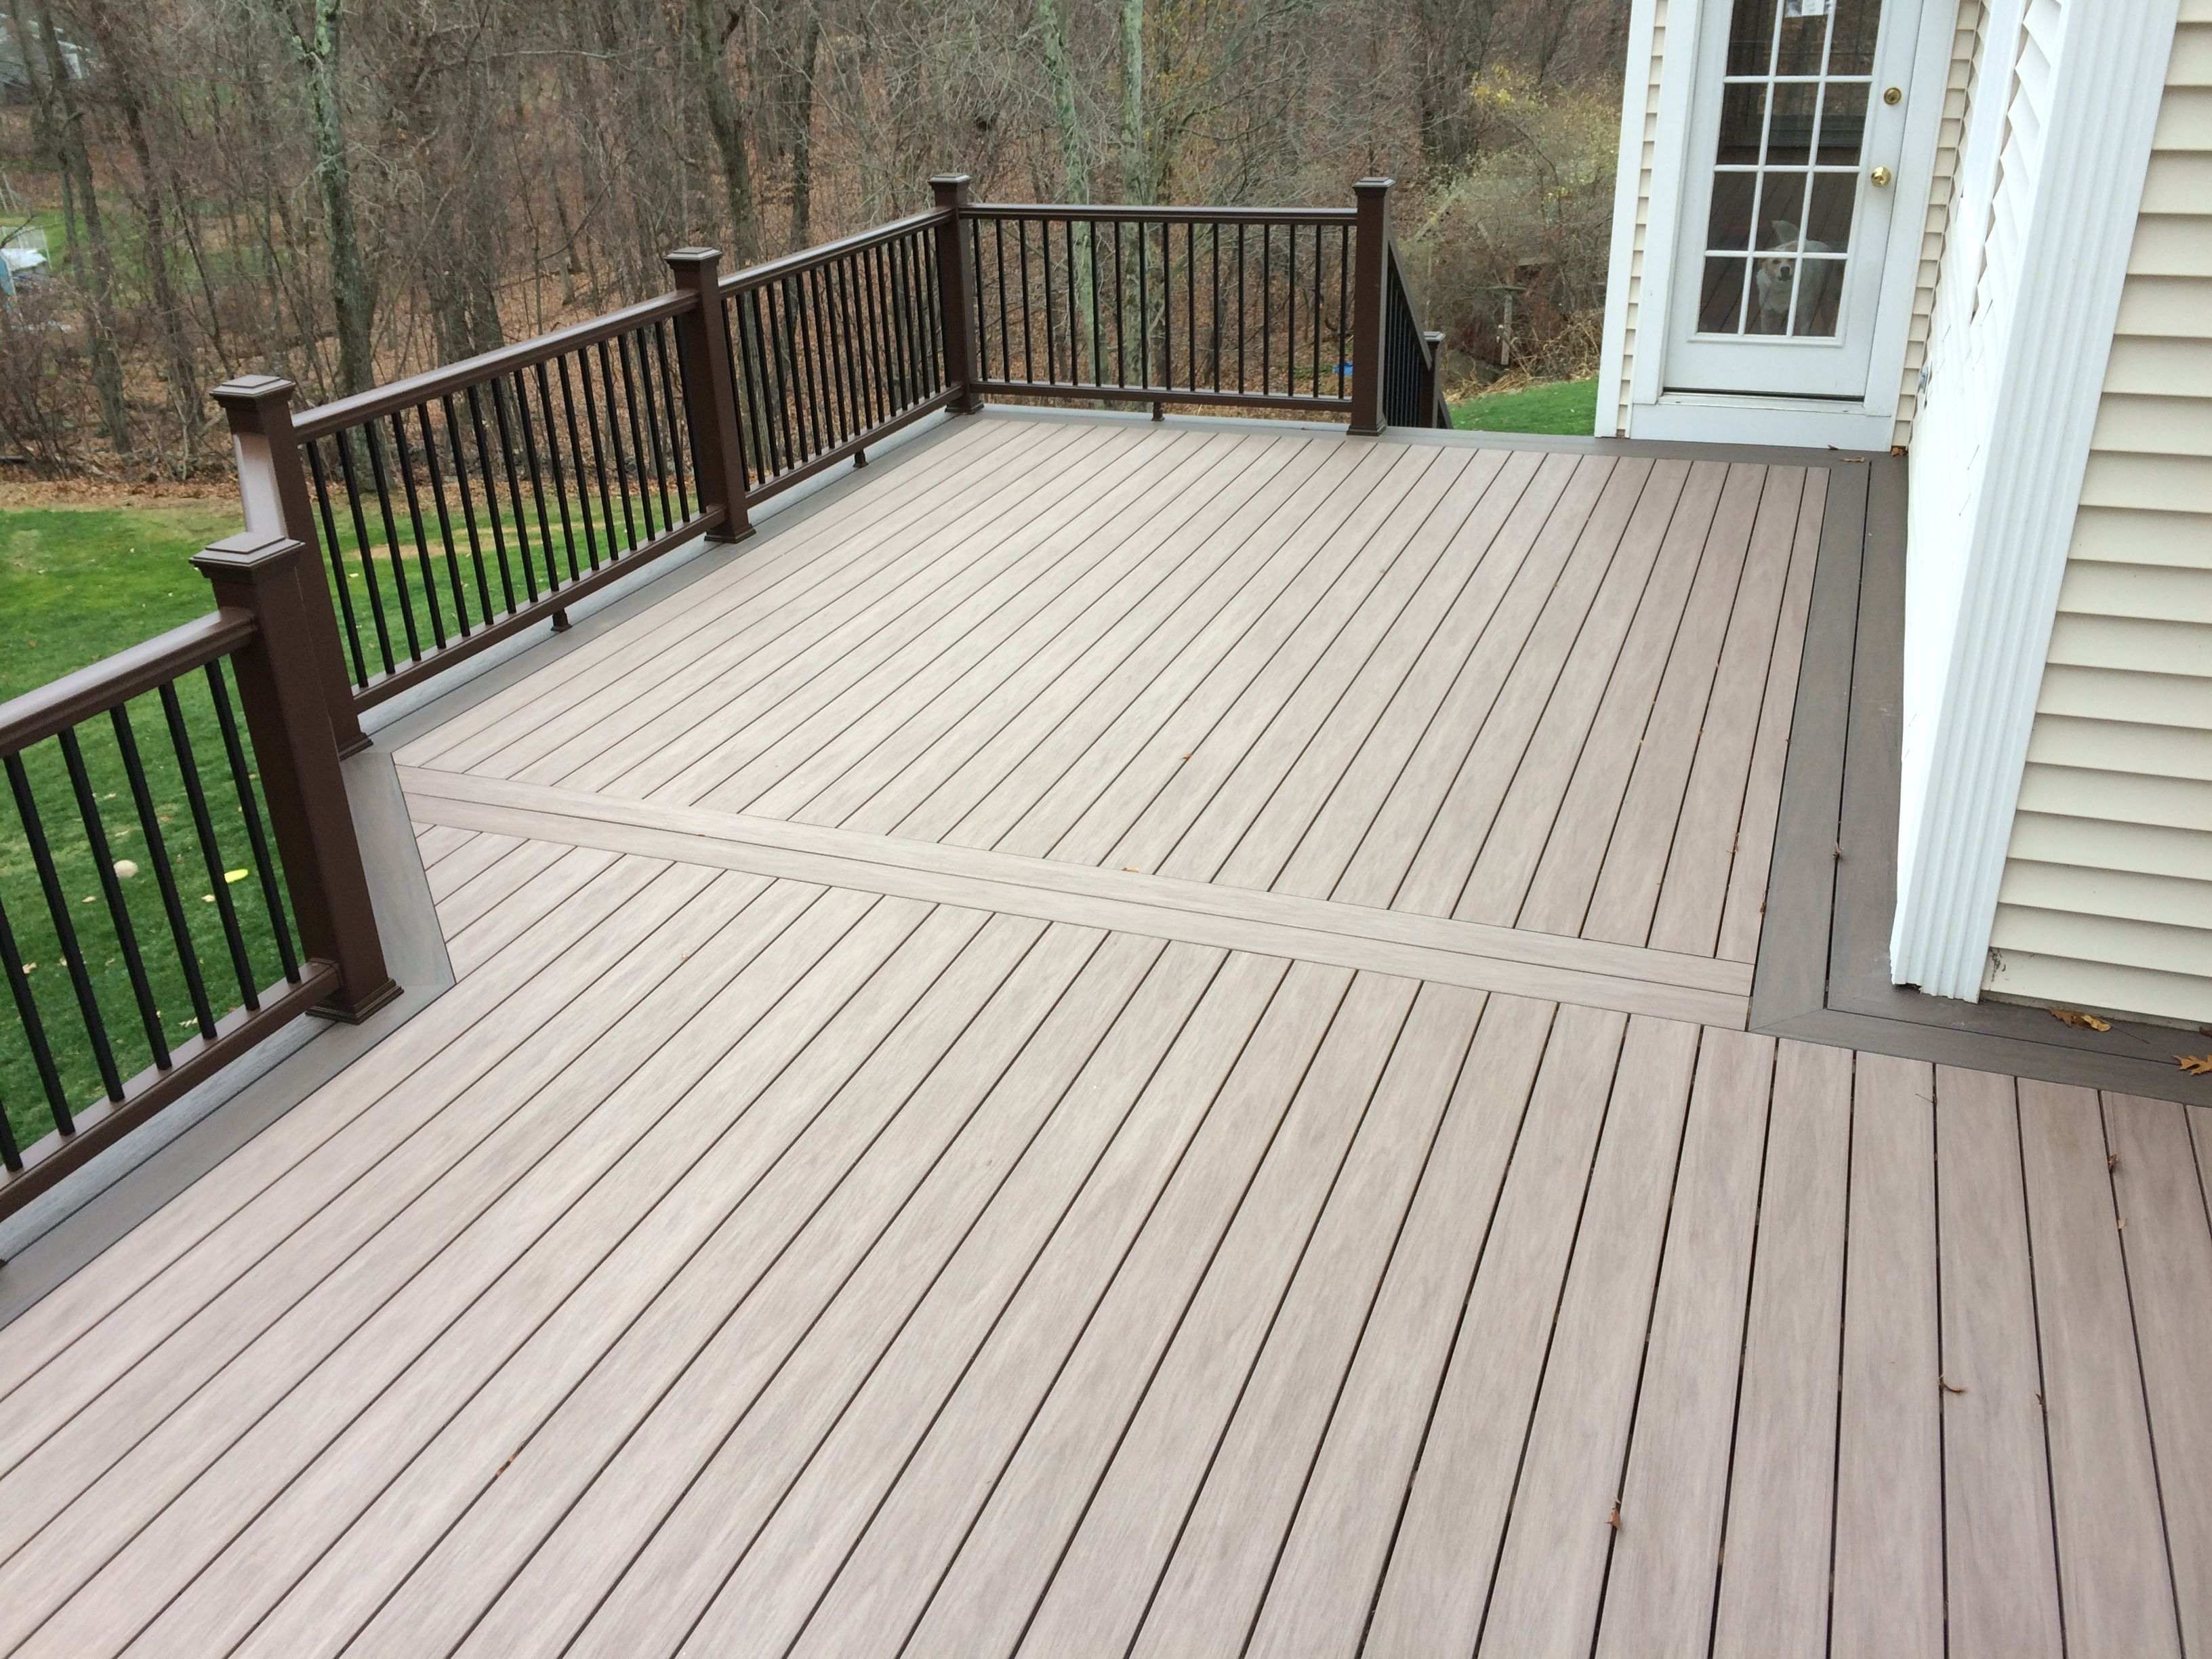 Wolf Composite Decking Bull Decks Ideas Pvc And Porch With Sizing in size 3264 X 2448